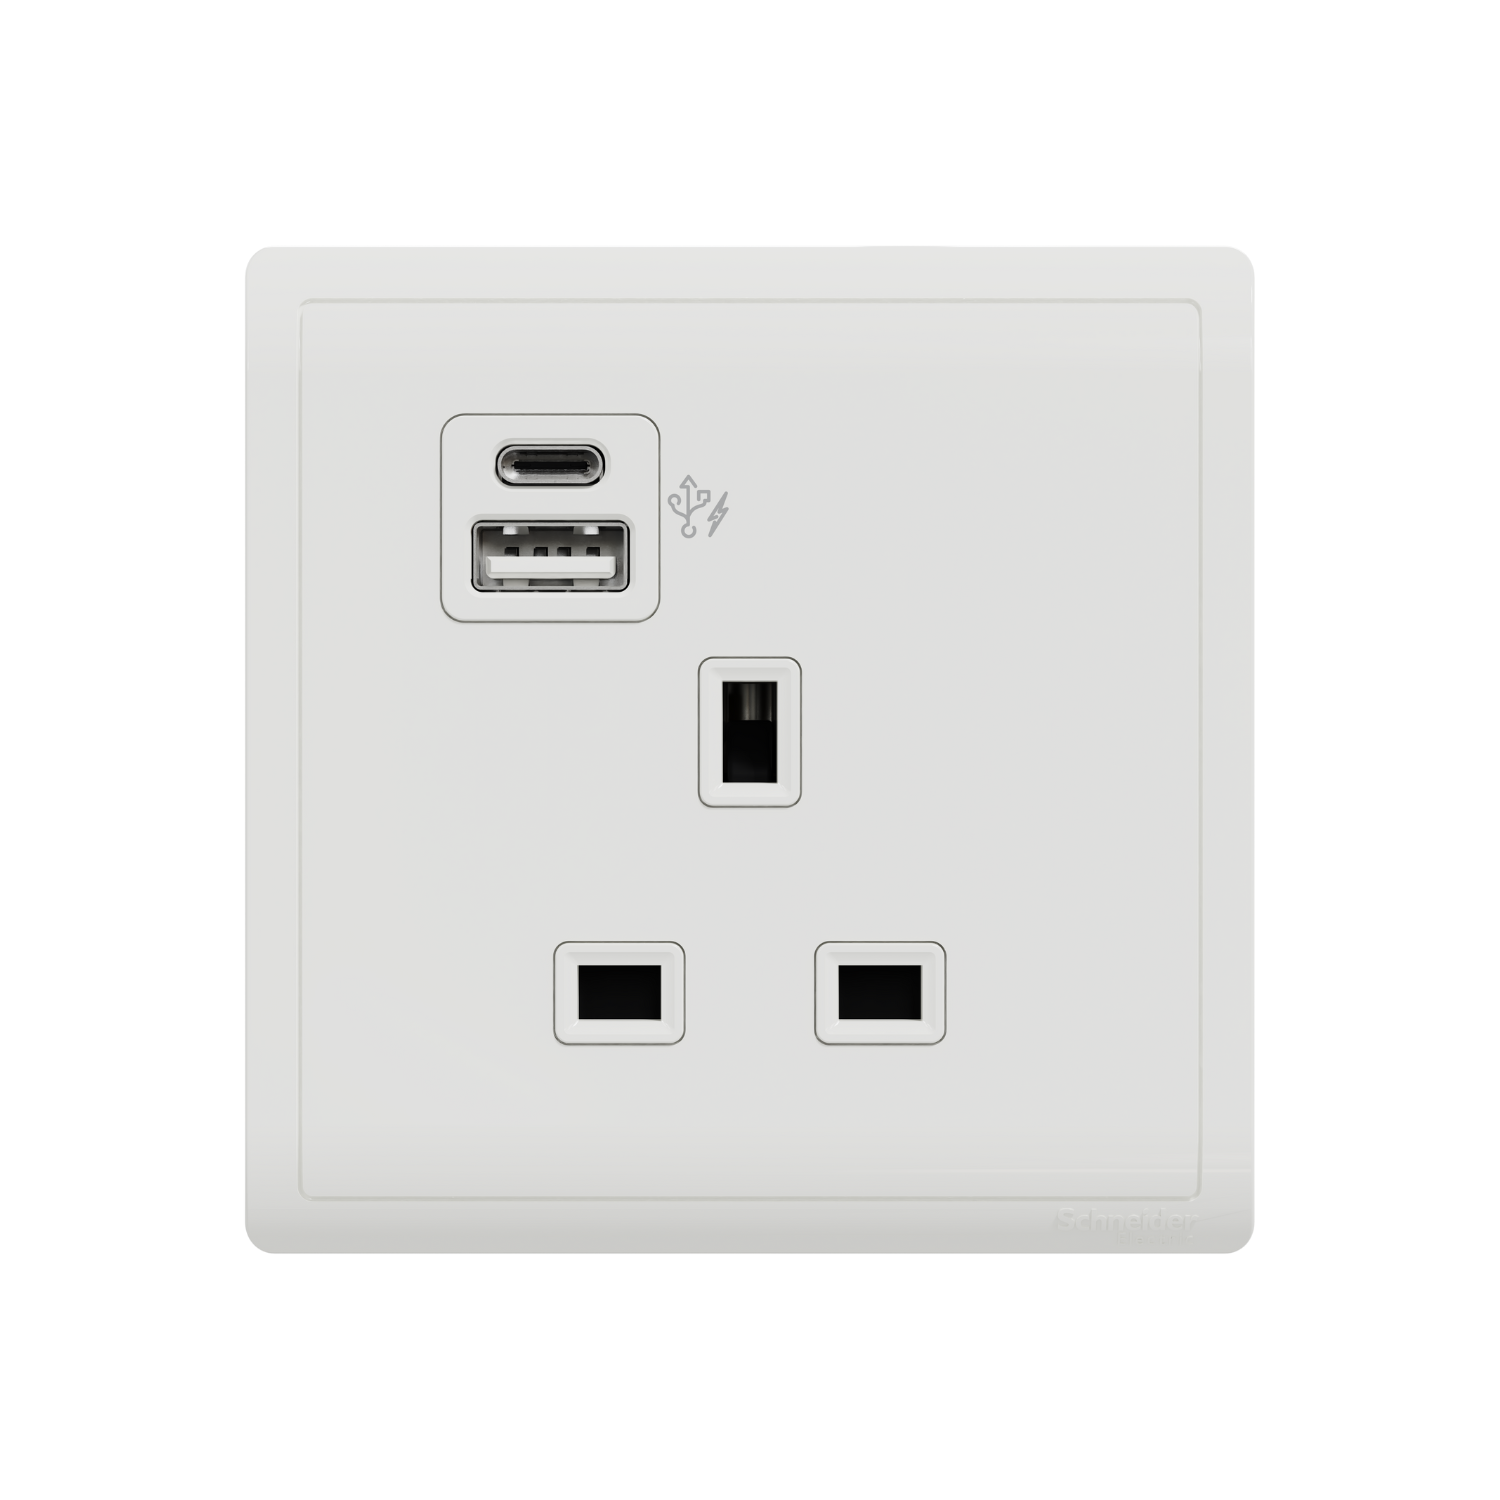 PIENO 13A 1 Gang Socket with 2 Gang USB Fast Charger Socket Type A+C, White